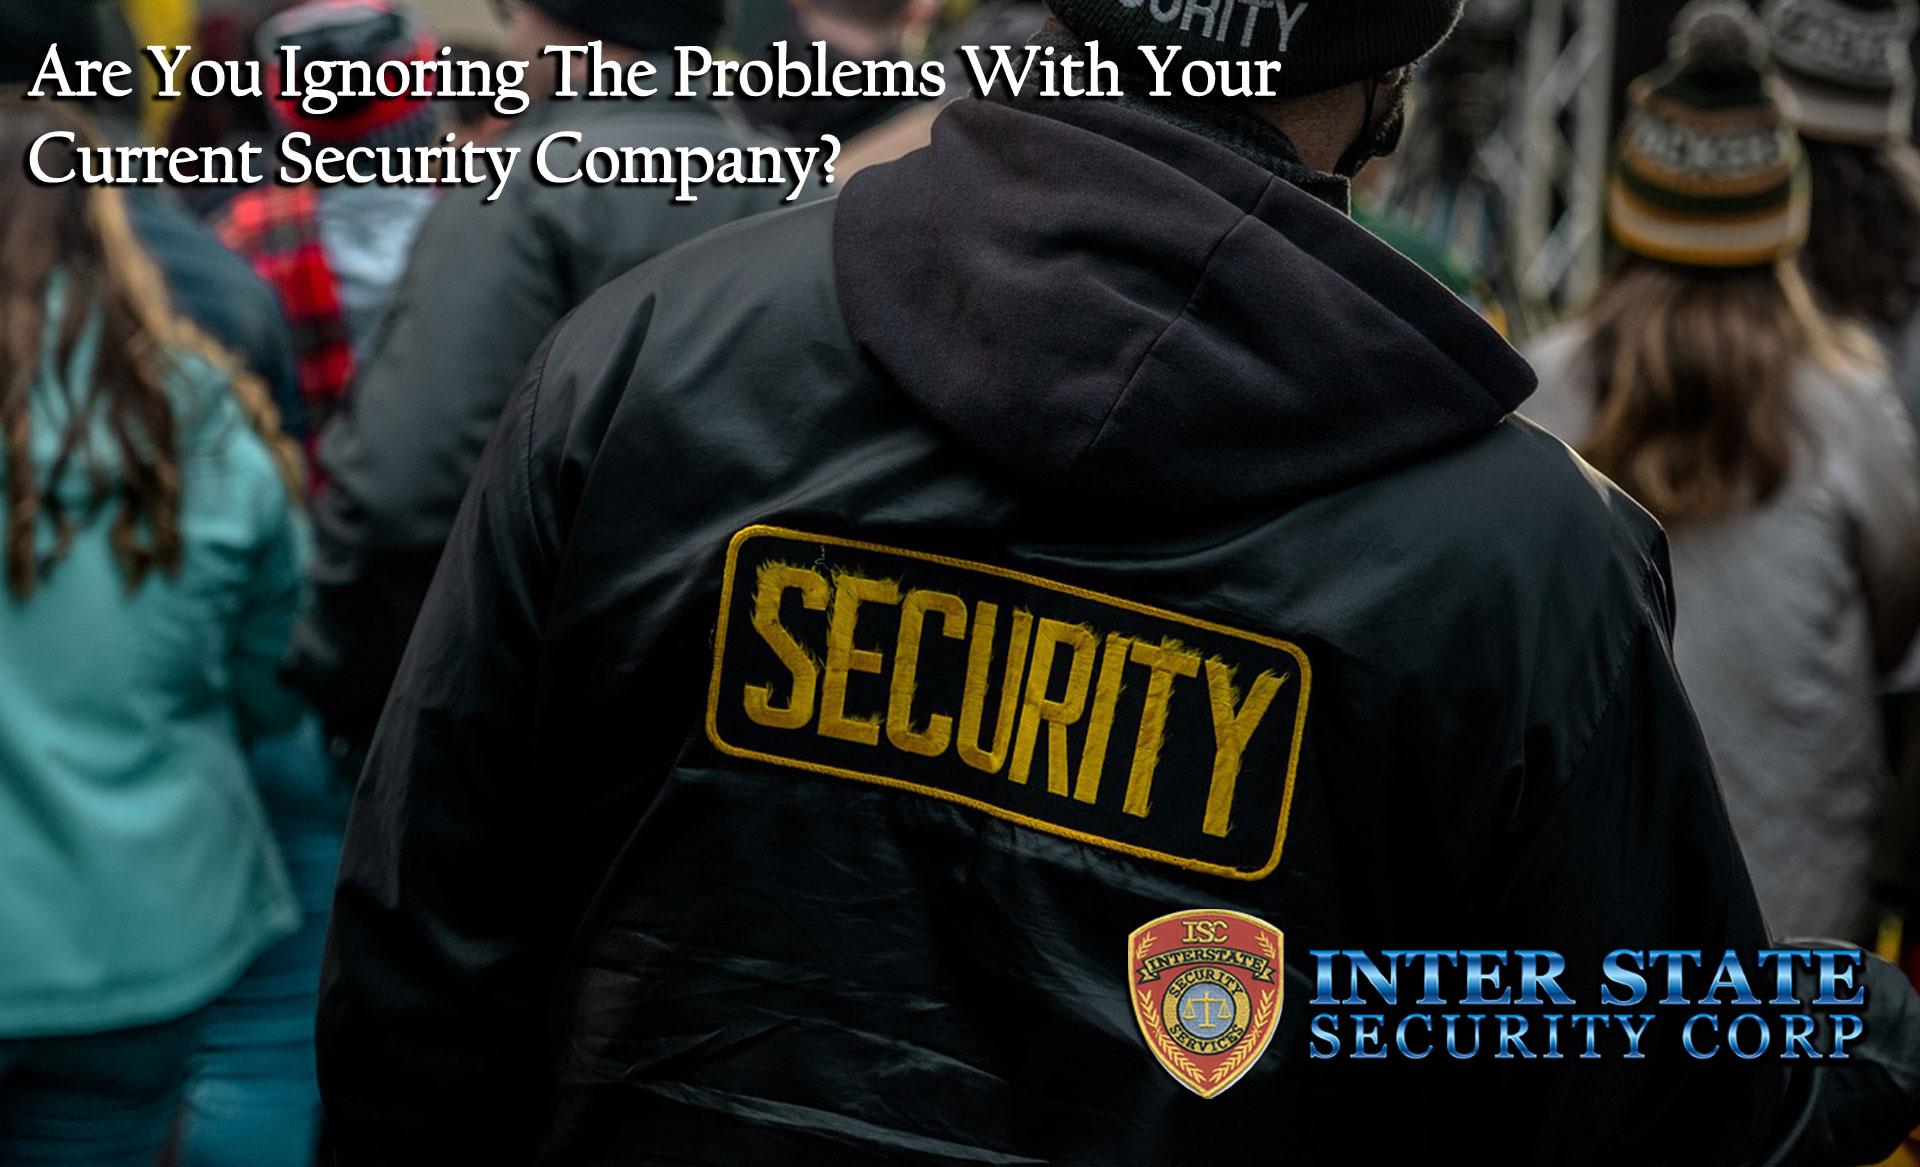 Are You Ignoring The Problems With Your Current Security Company